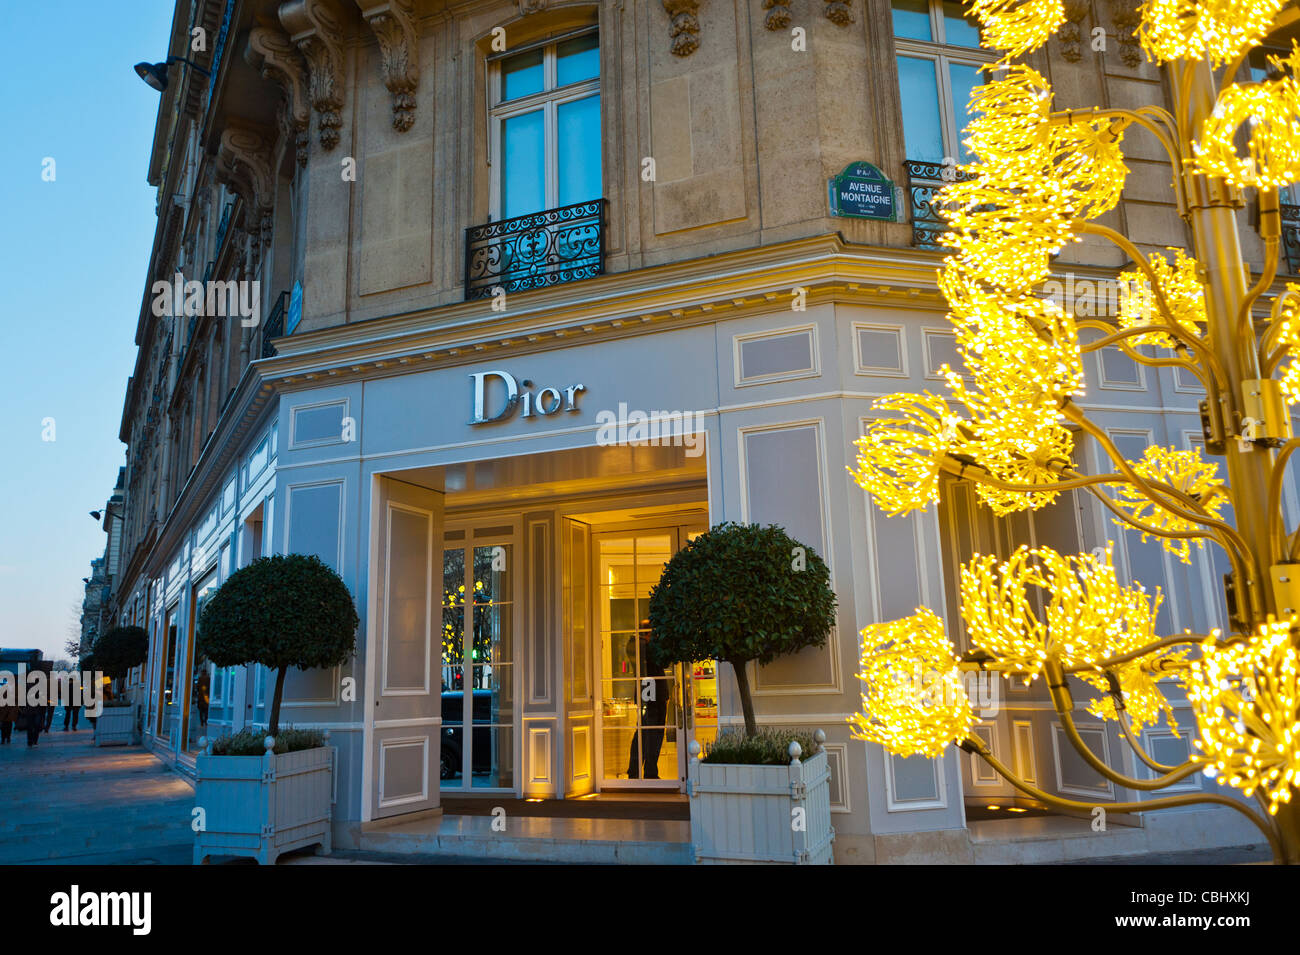 Paris, France, Luxury Christmas Shopping, "Christian Dior" Store, Store Front Entrance with LED Christmas Tree Decorations Display on Street Stock Photo